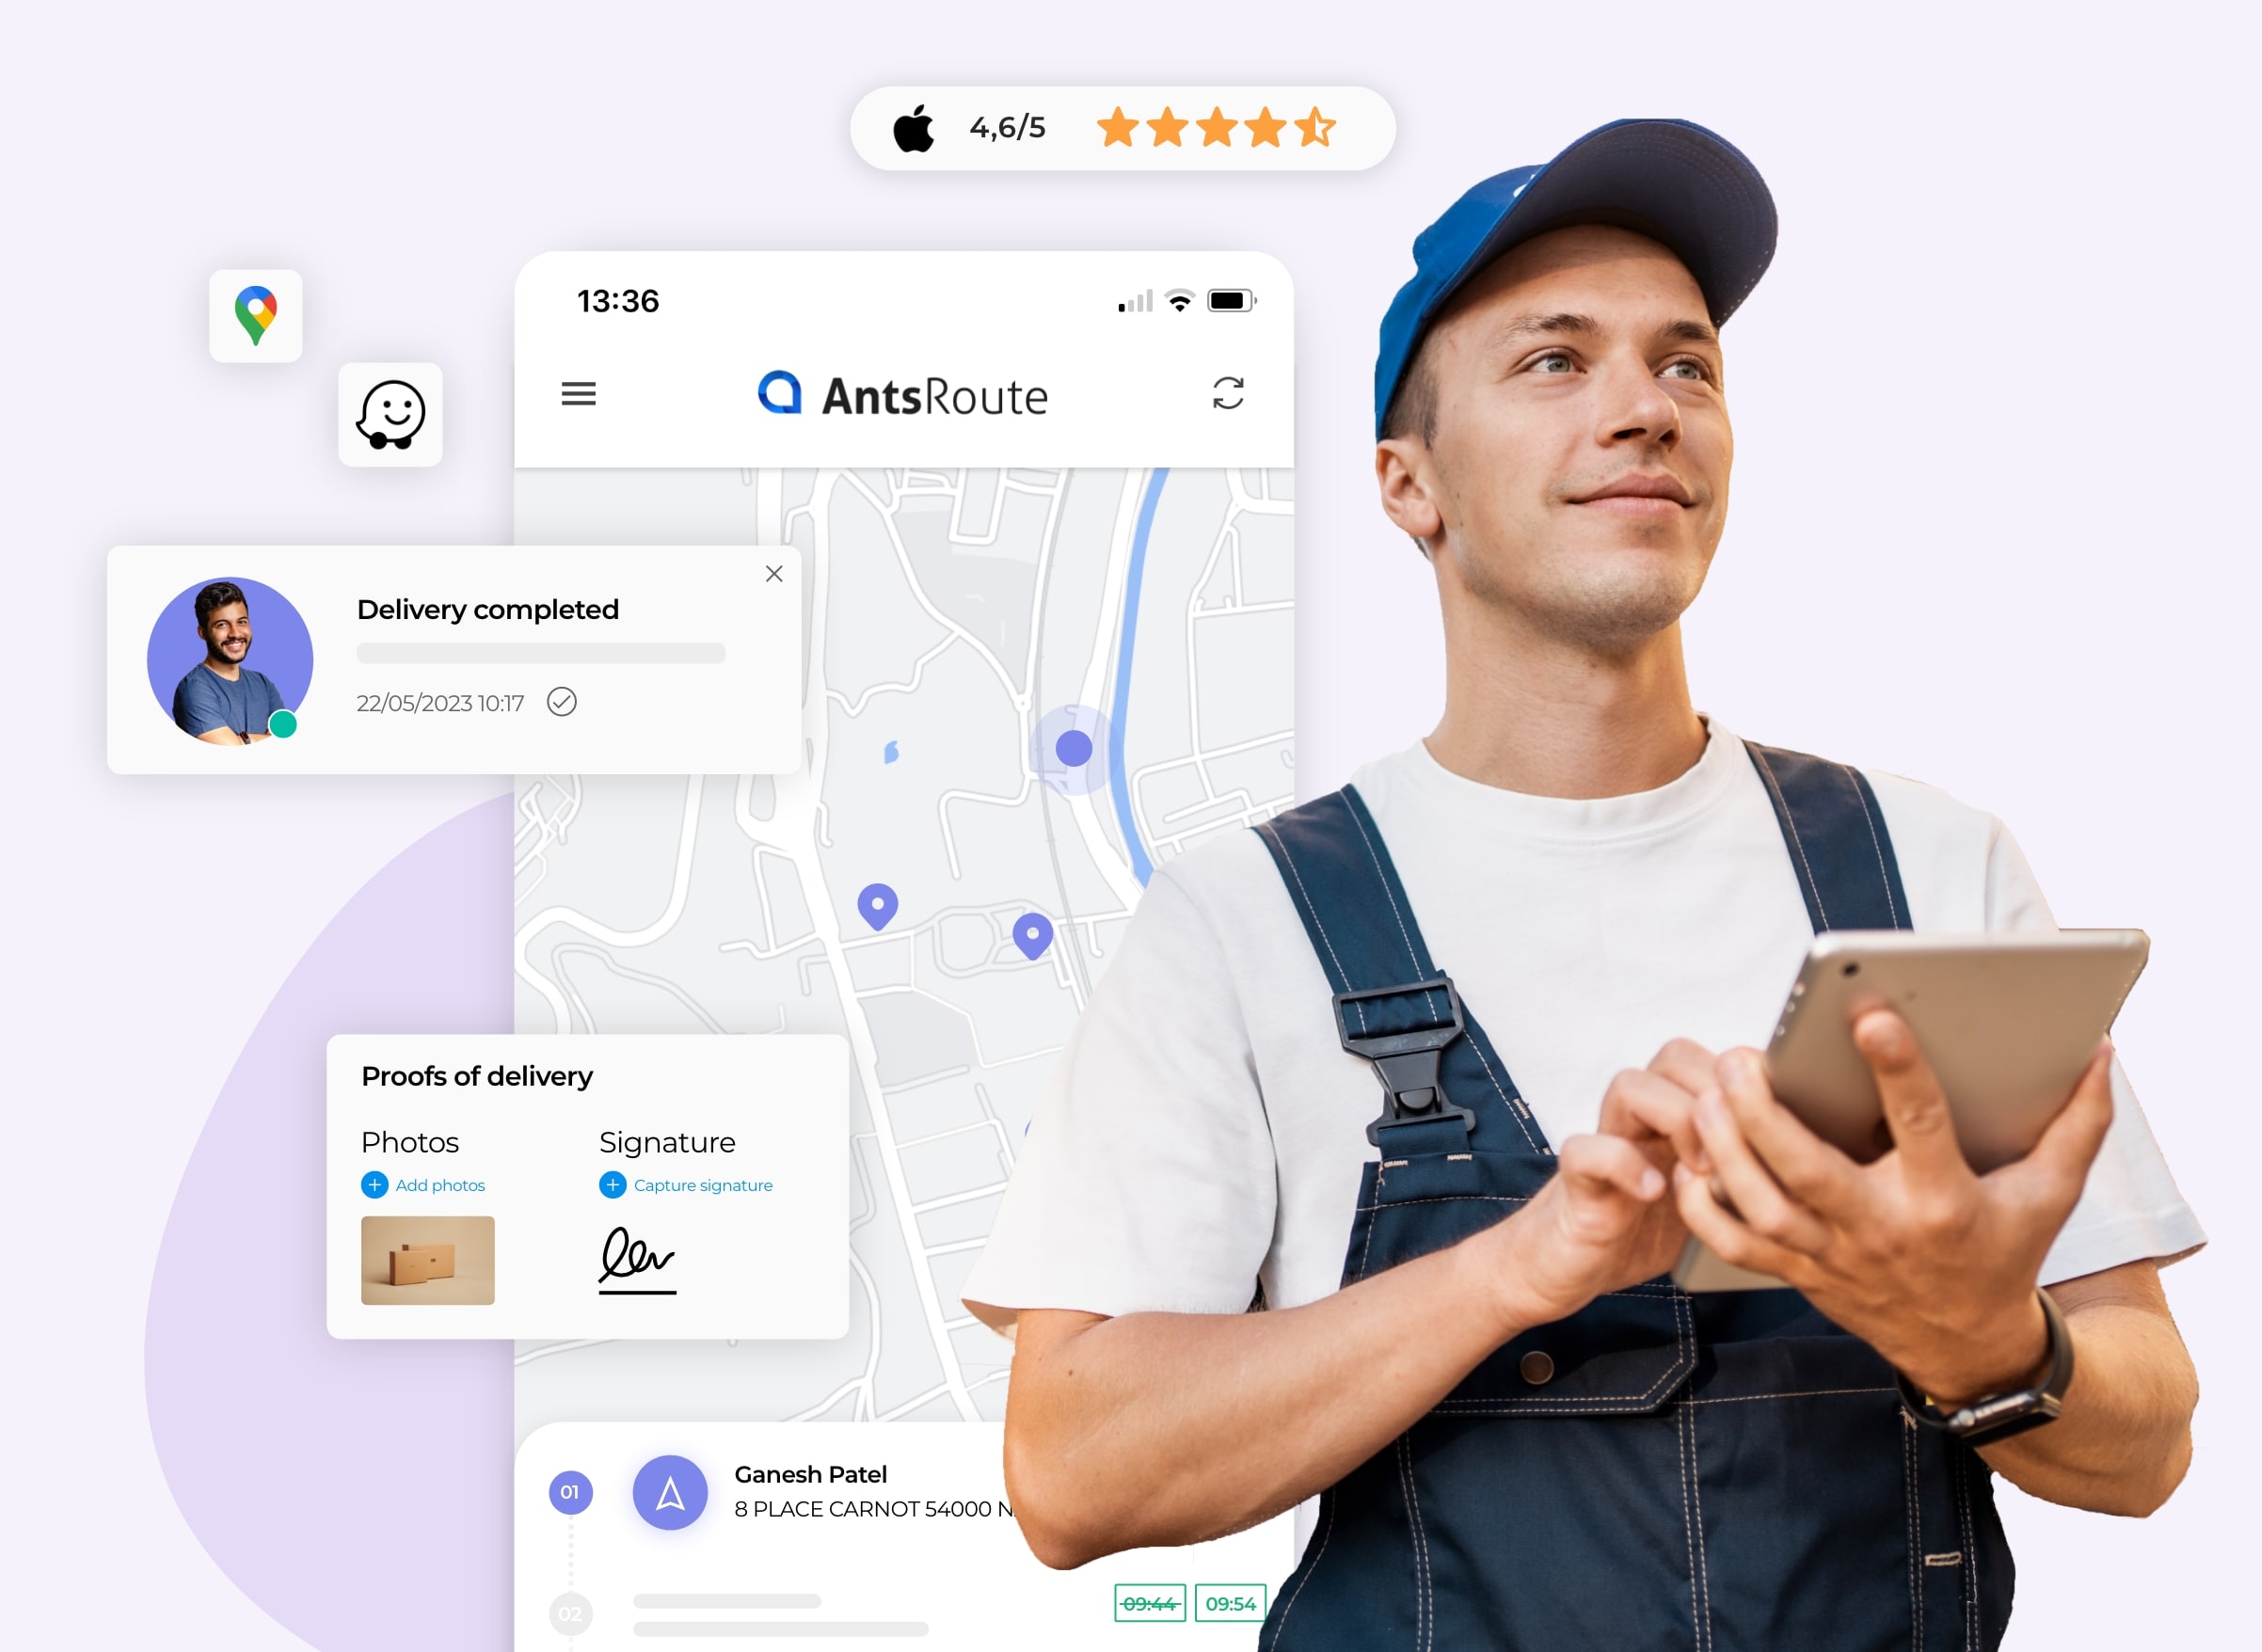 The AntsRoute platform makes work easier for your delivery drivers.